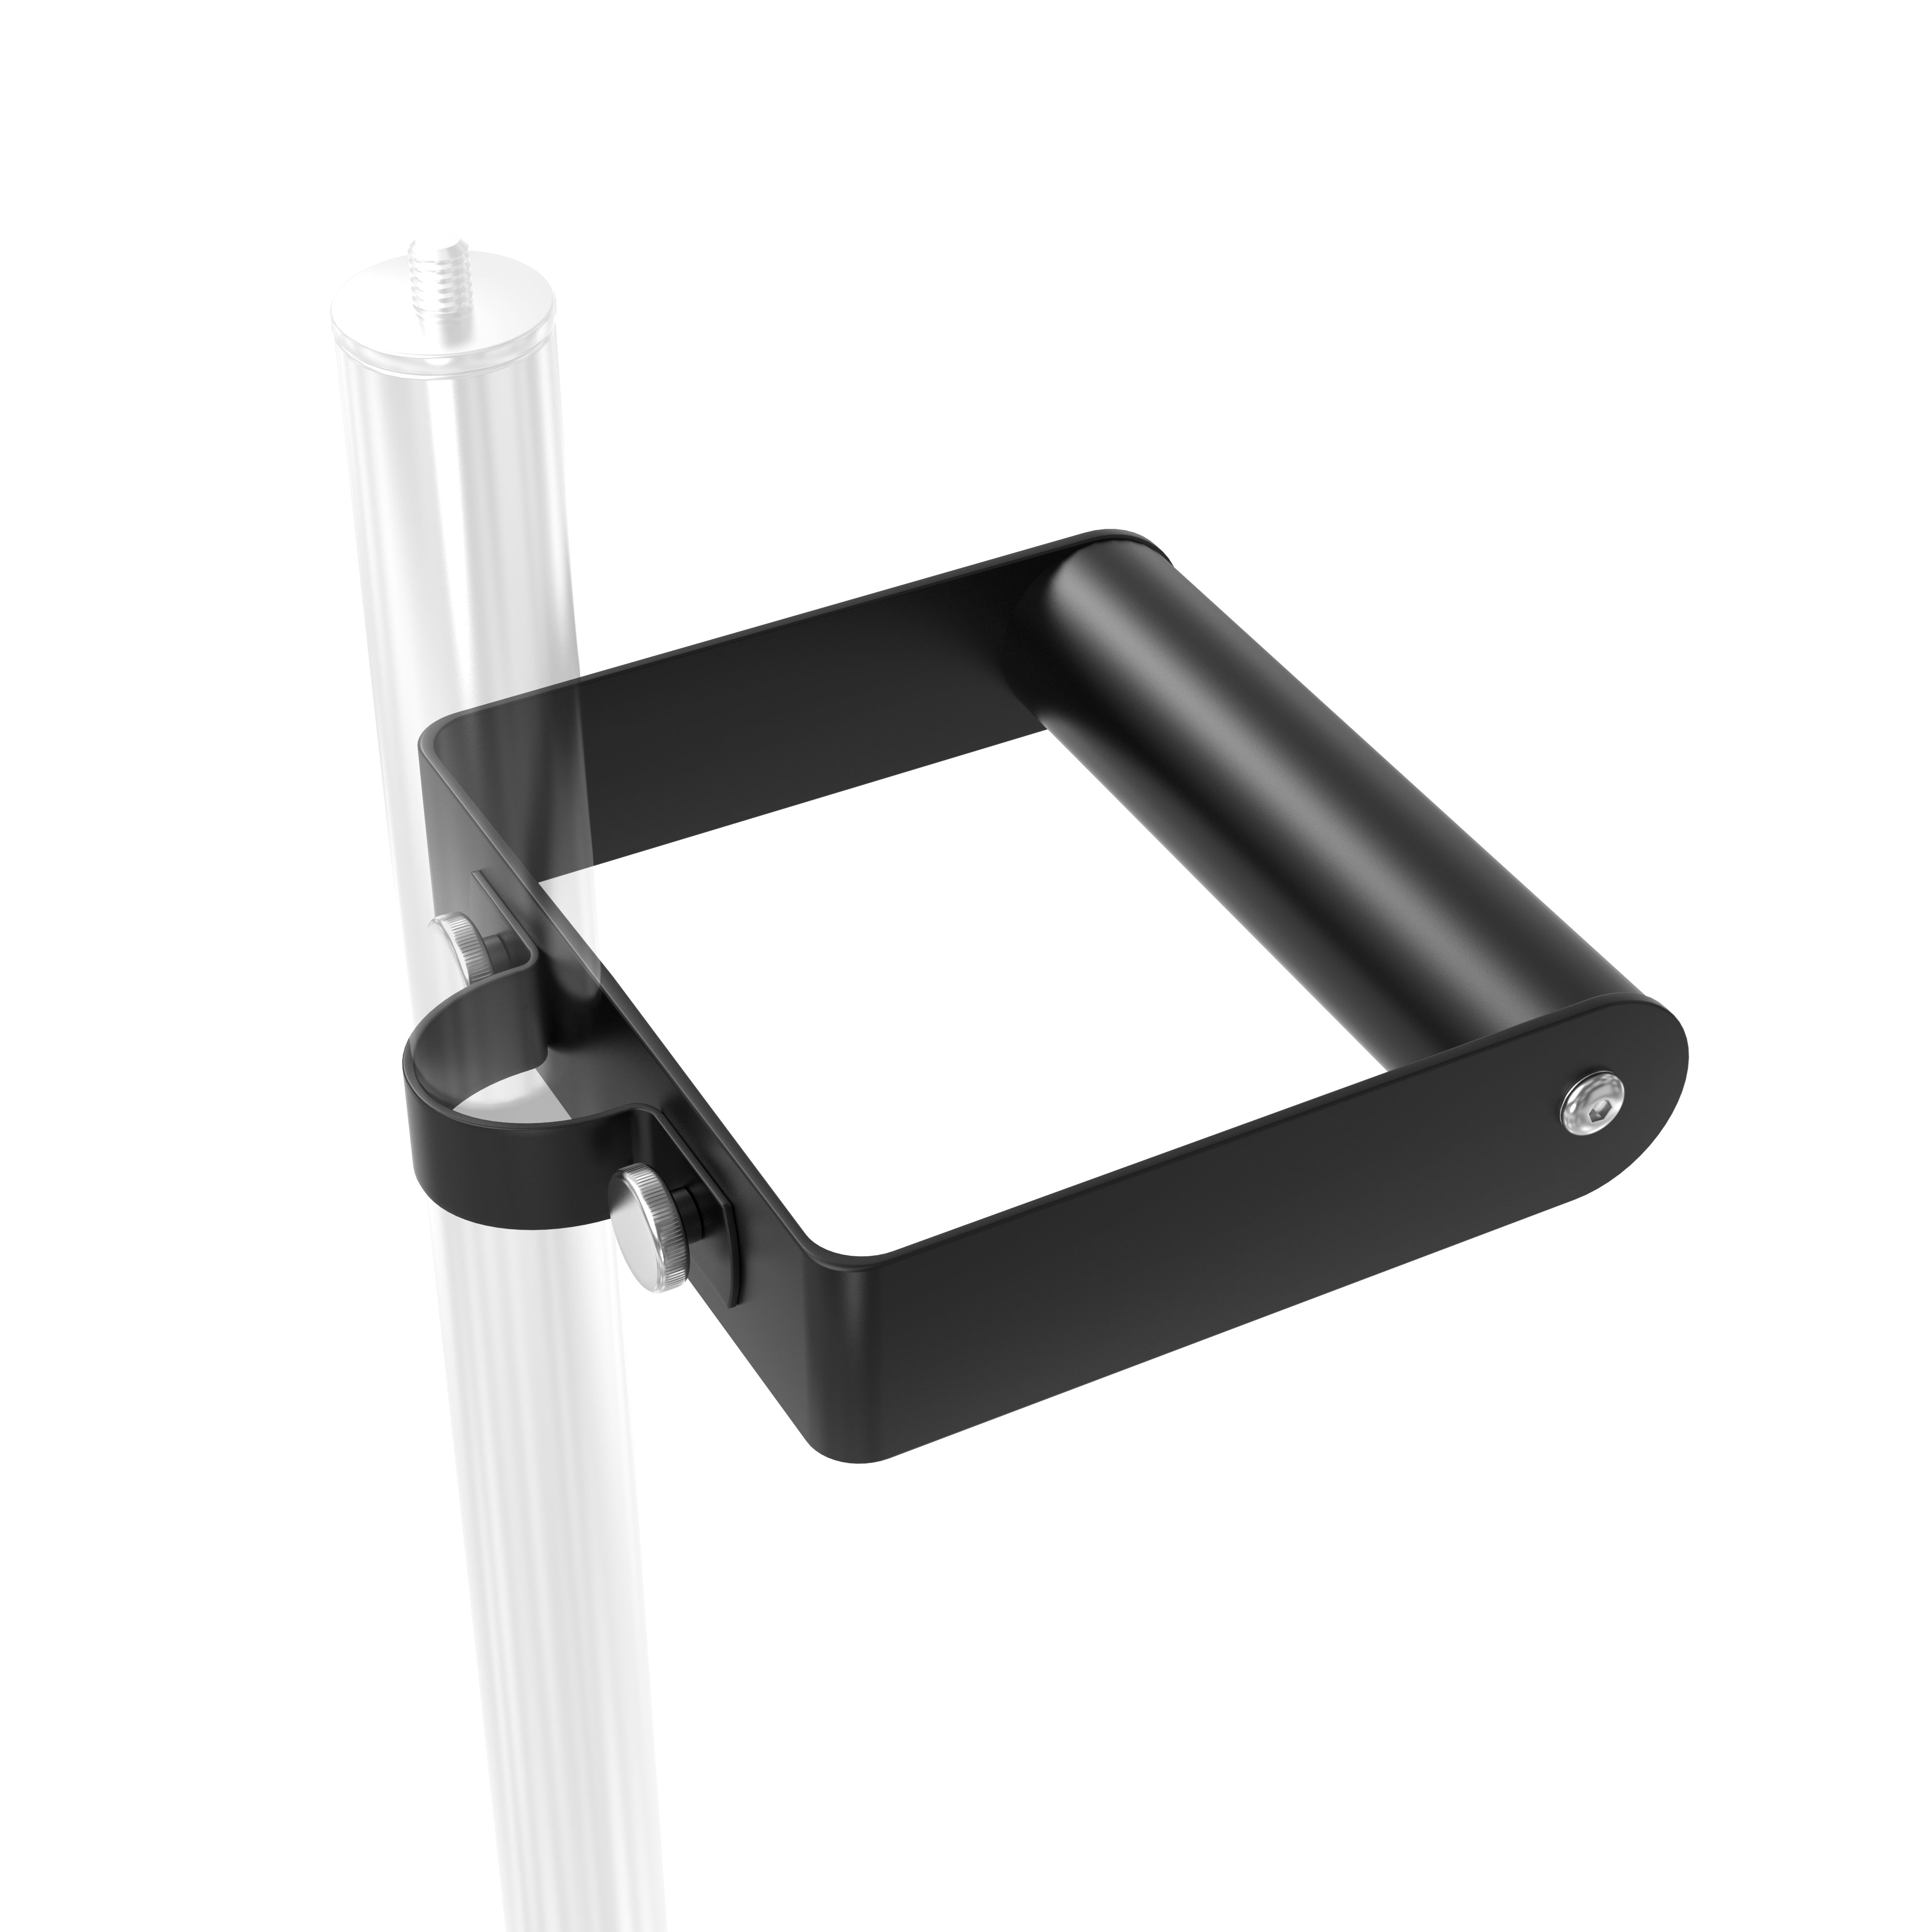 Add-On Handle for Rolling Floor Stand